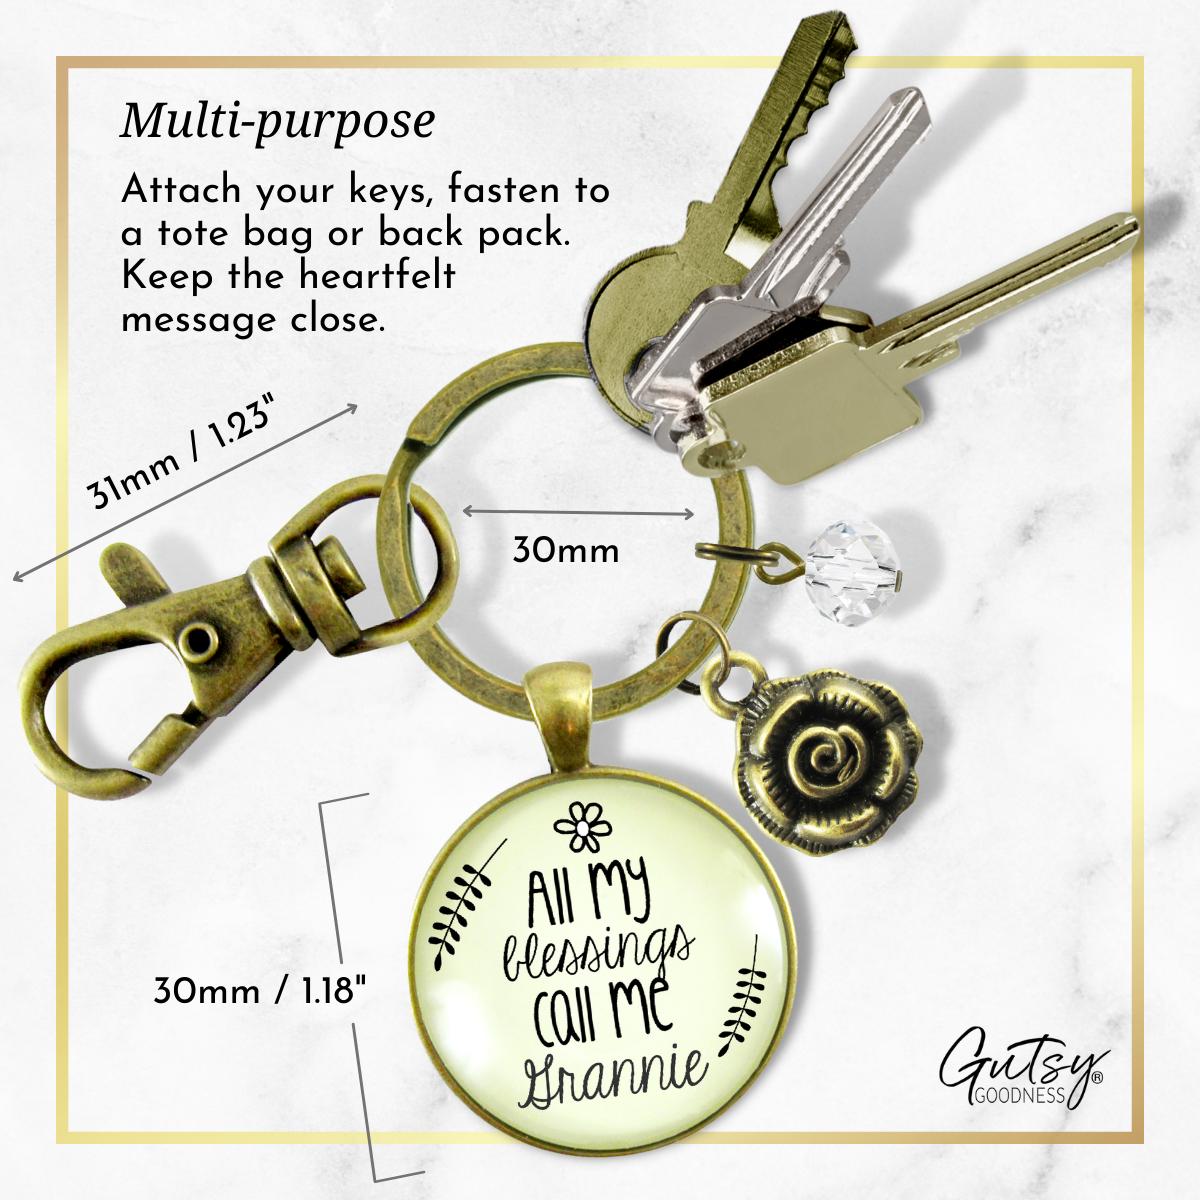 Grannie Keychain All My Blessings Meaningful Grandma Gift Charm Jewelry - Gutsy Goodness Handmade Jewelry;Grannie Keychain All My Blessings Meaningful Grandma Gift Charm Jewelry - Gutsy Goodness Handmade Jewelry Gifts